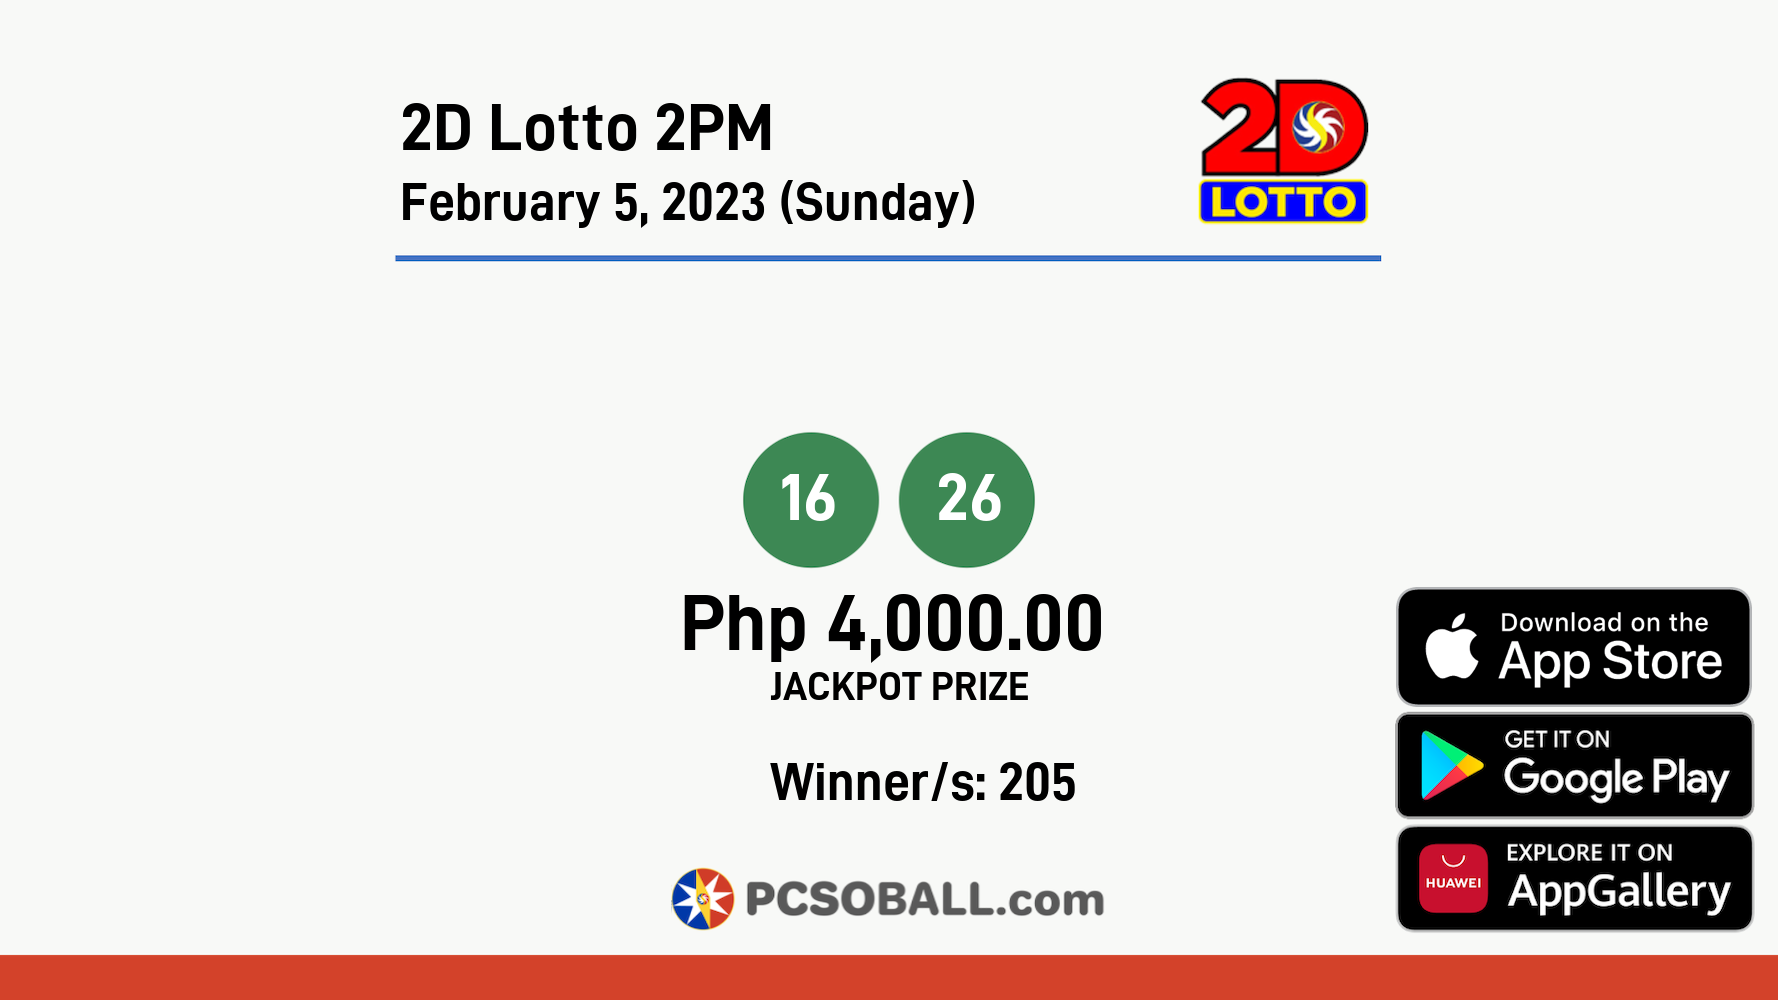 2D Lotto 2PM February 5, 2023 (Sunday) Result